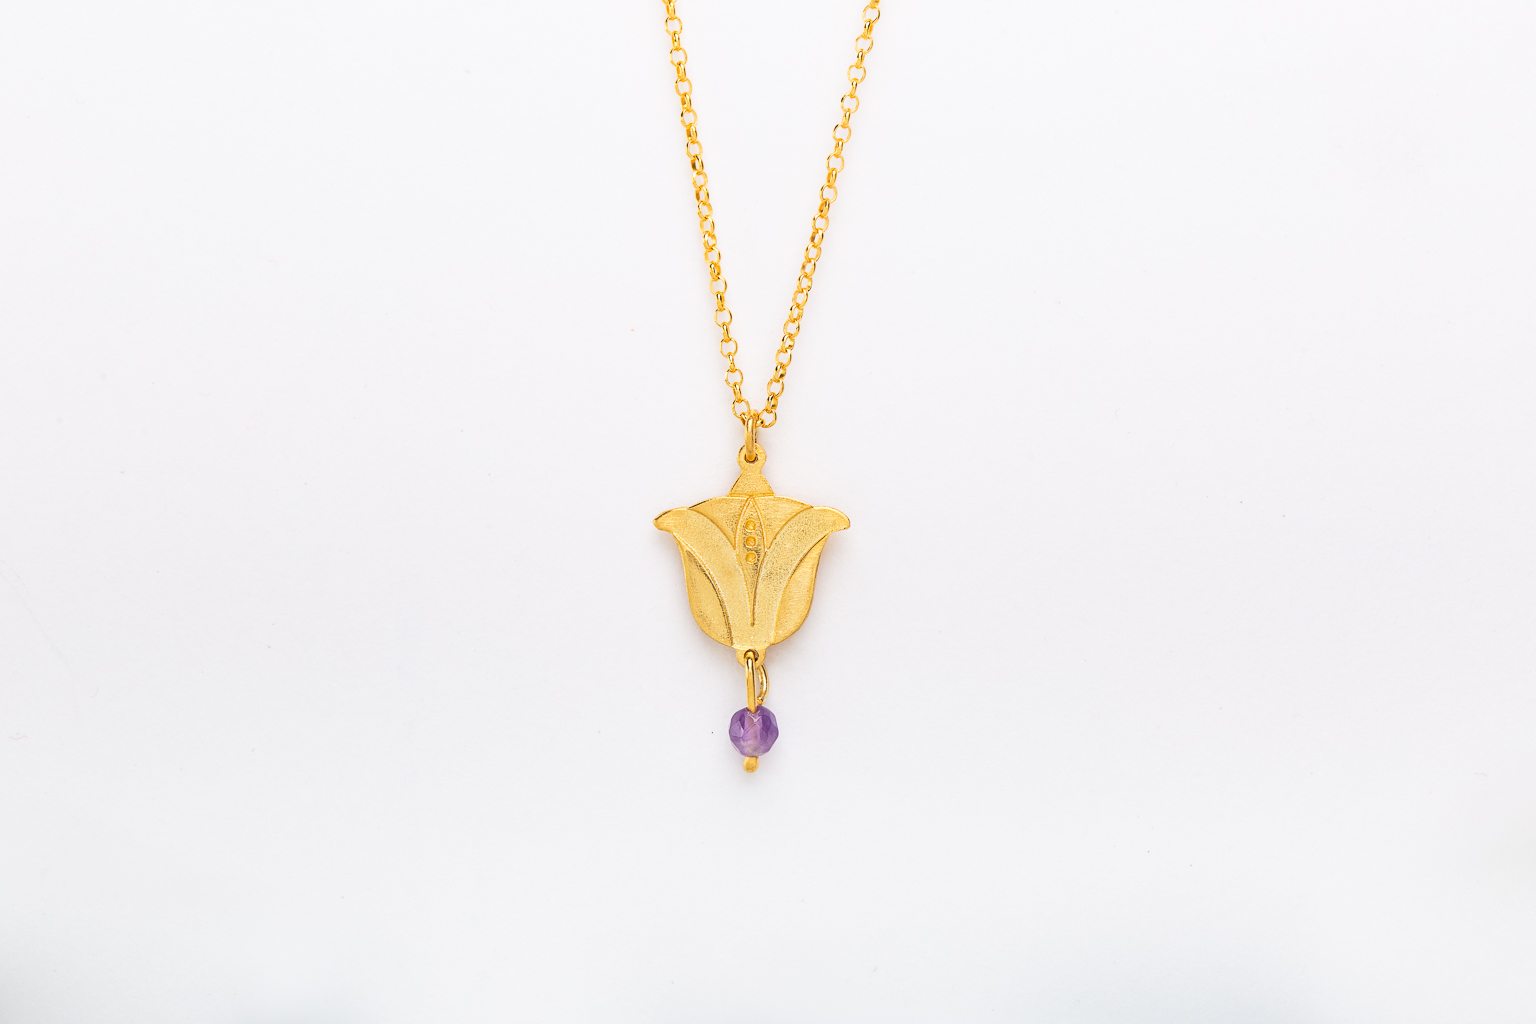 Gold-plated tulip necklace with amethyst